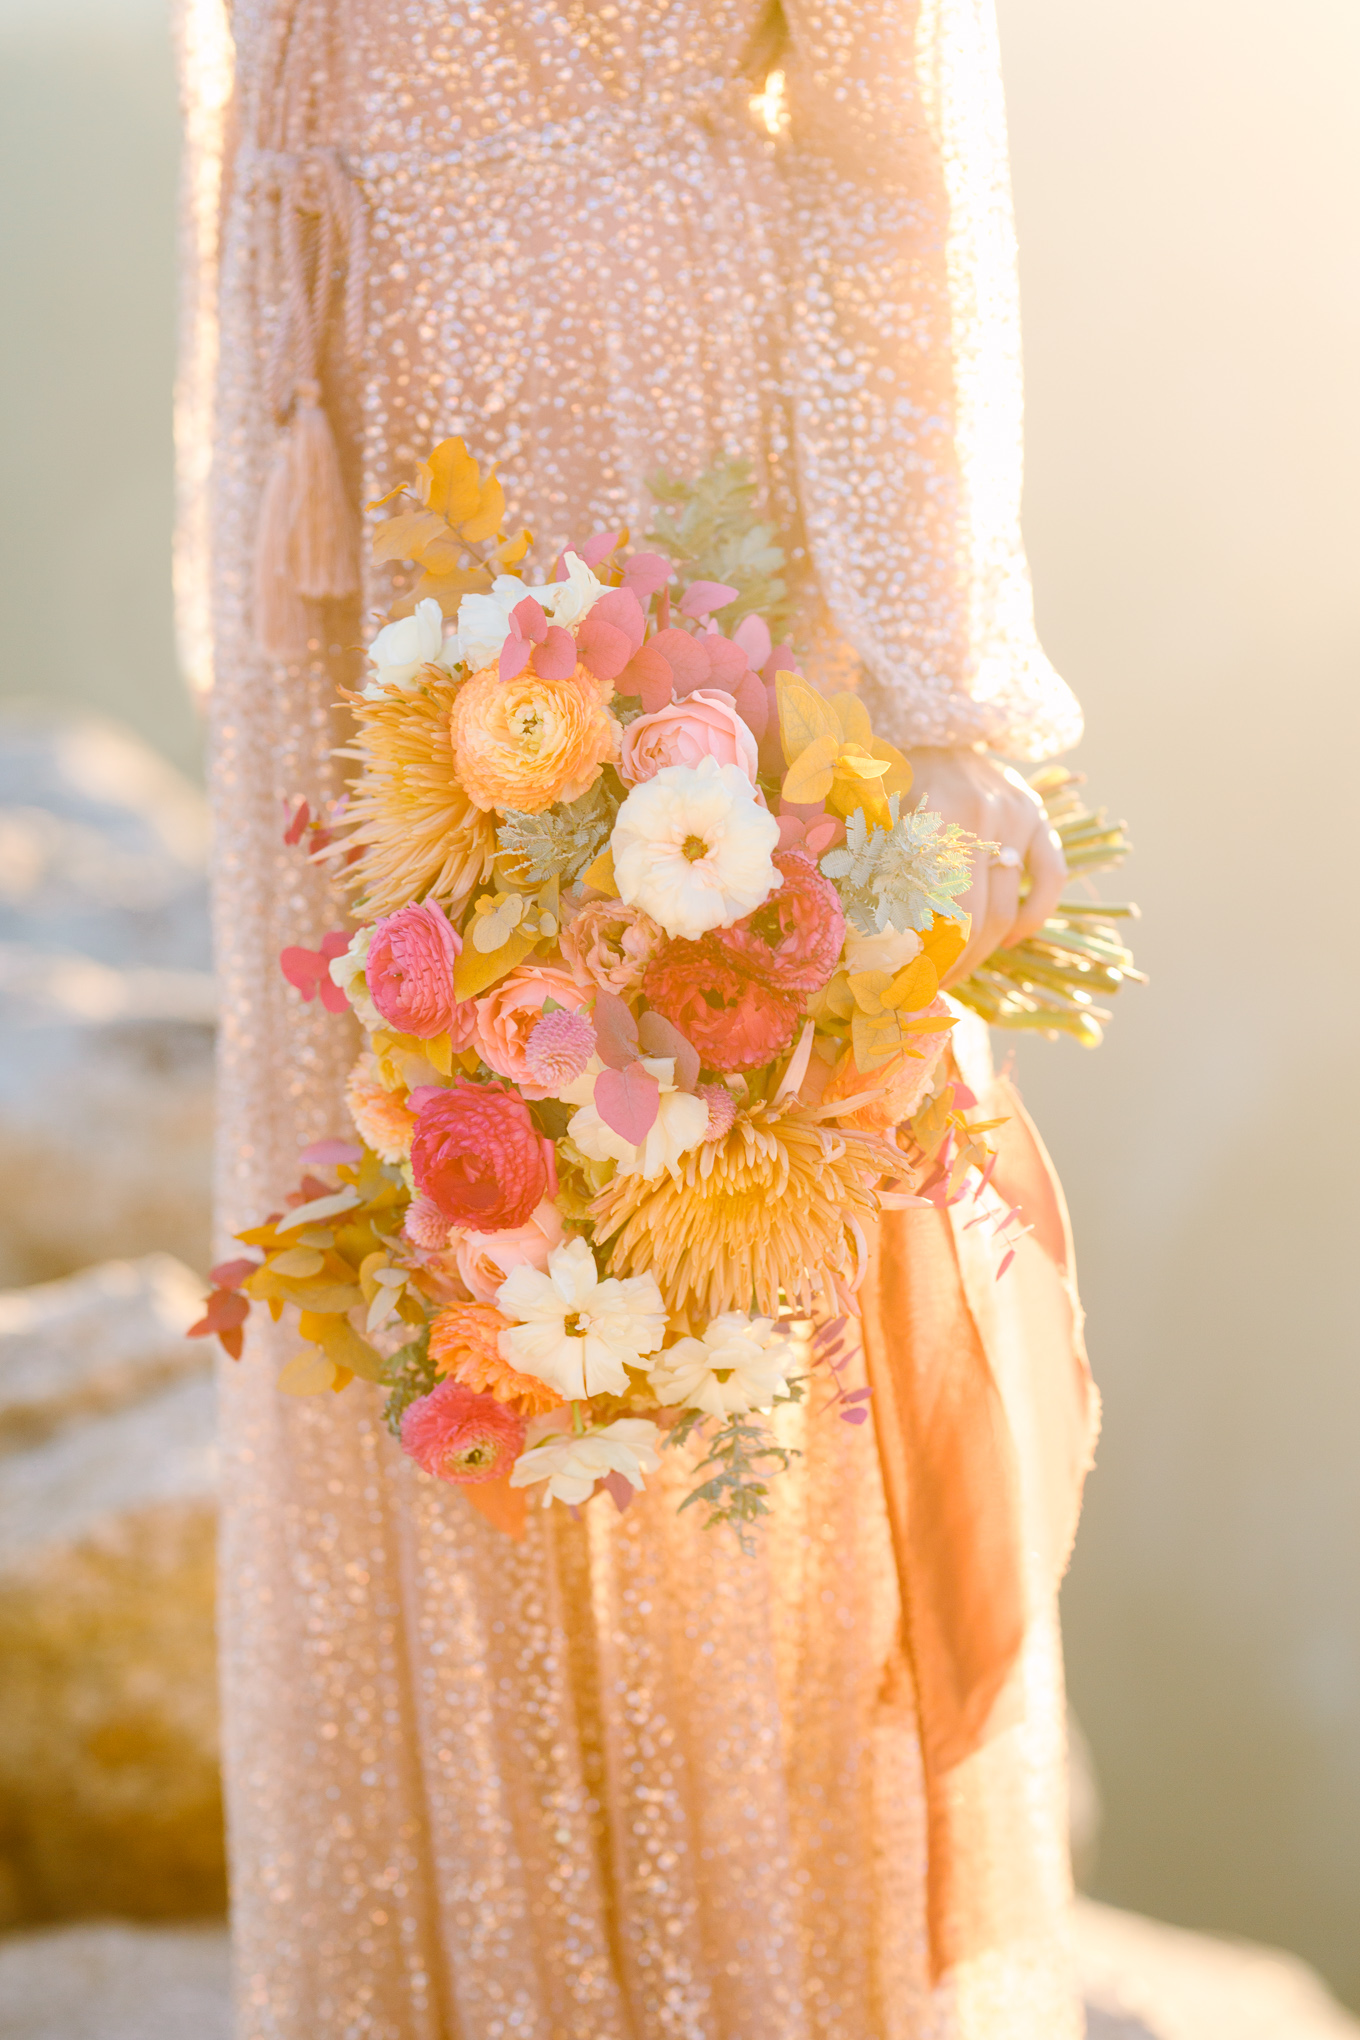 Autumn engagement bouquet in Yosemite National Park | Beautiful bridal bouquet inspiration and advice | Colorful and elevated wedding photography for fun-loving couples in Southern California | #weddingflowers #weddingbouquet #bridebouquet #bouquetideas #uniquebouquet   Source: Mary Costa Photography | Los Angeles